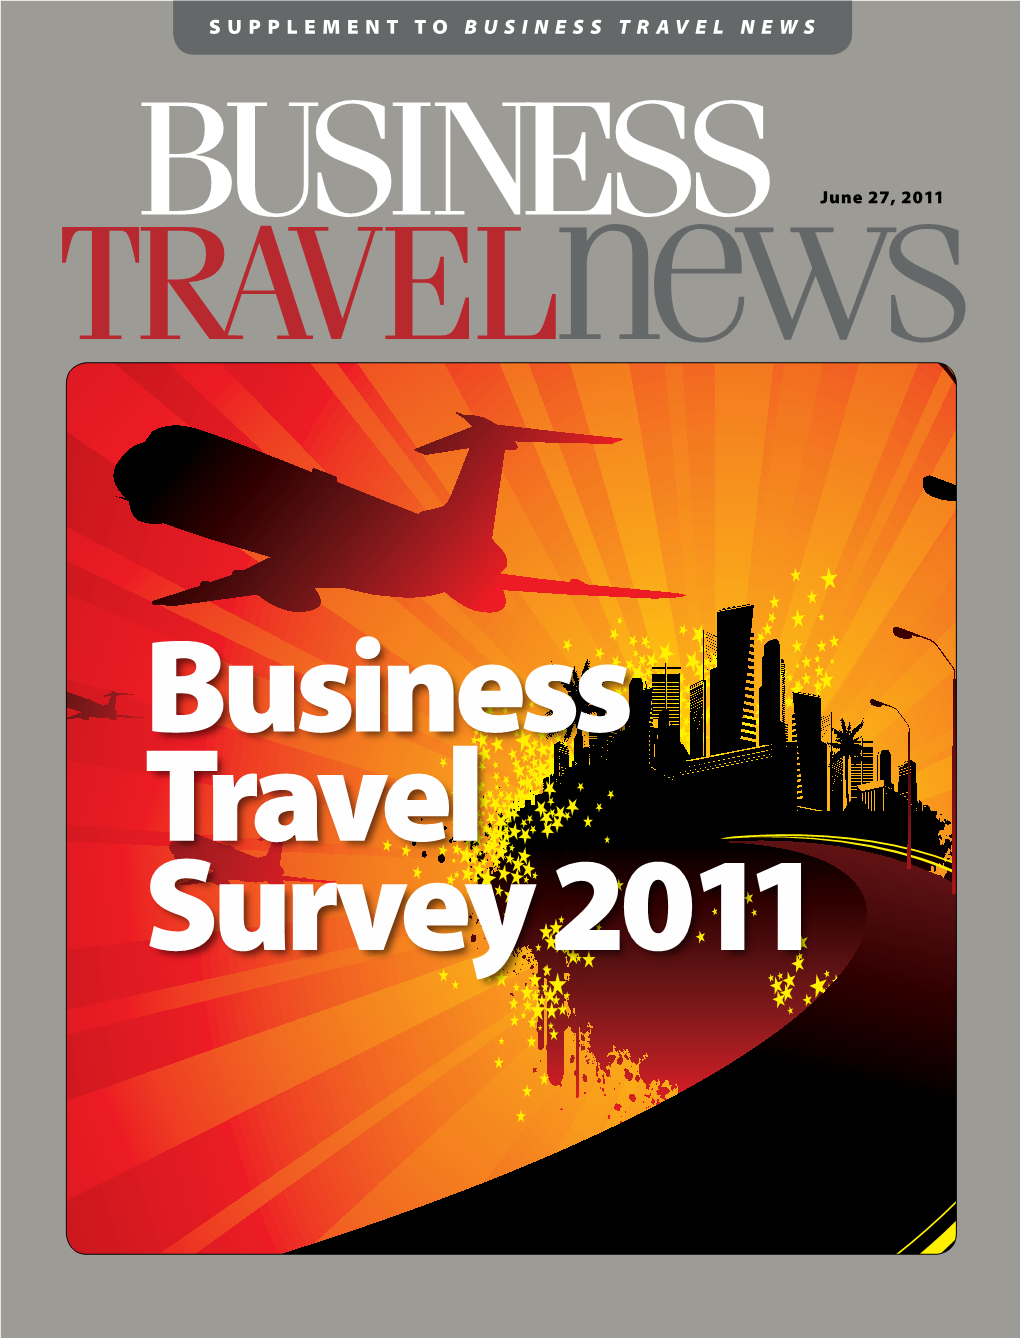 SUPPLEMENT to Business Travel News